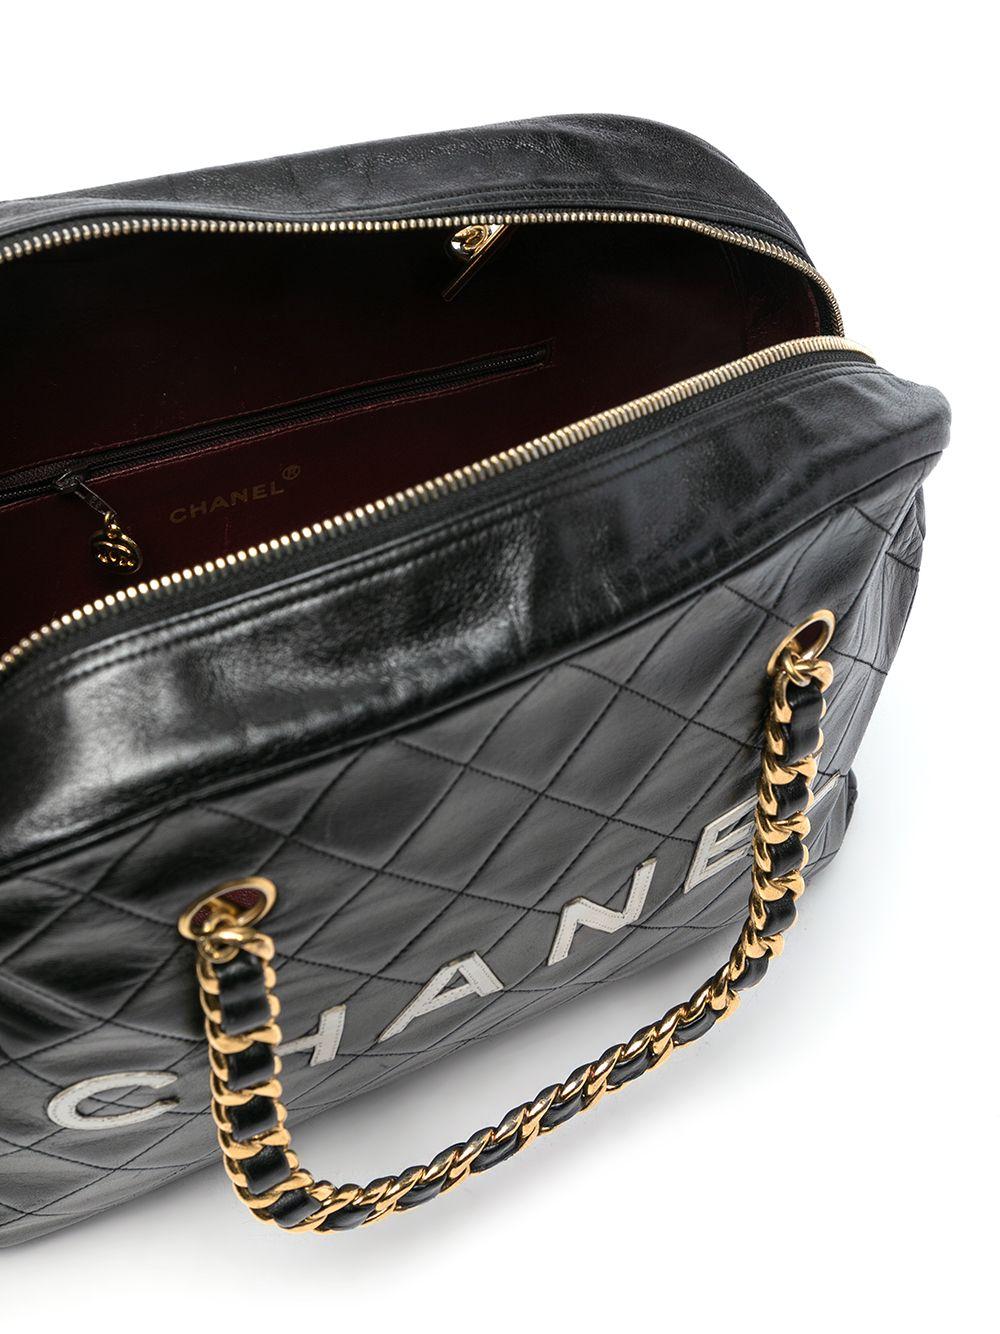 Chanel Vintage Black Quilted Lambskin Leather Medium Bowling Bag For Sale 1